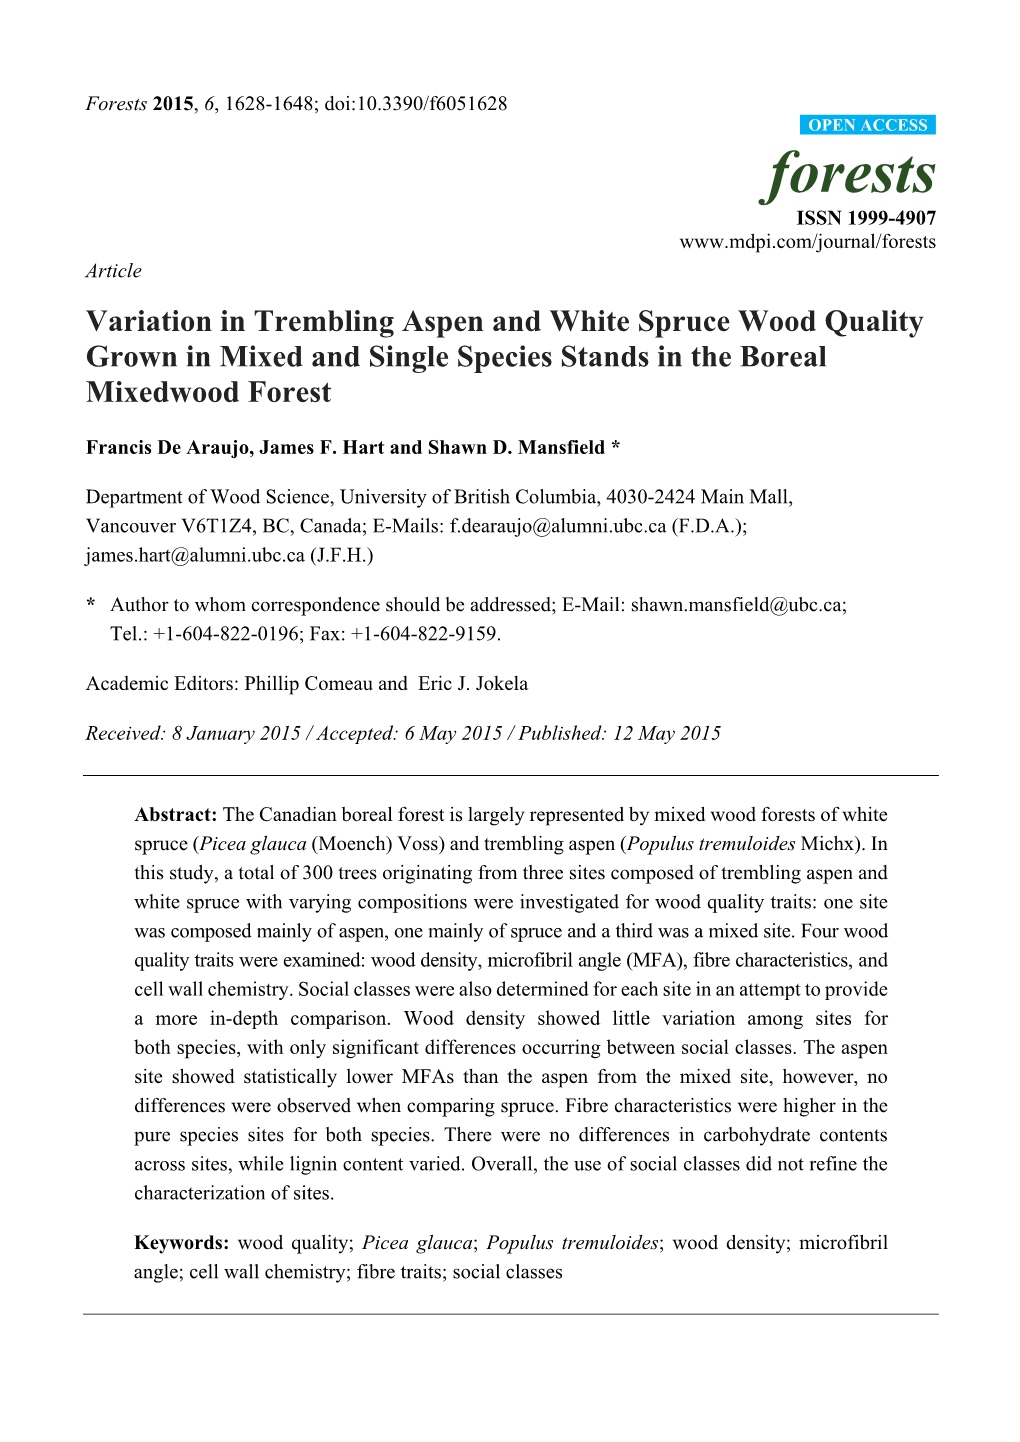 Variation in Trembling Aspen and White Spruce Wood Quality Grown in Mixed and Single Species Stands in the Boreal Mixedwood Forest